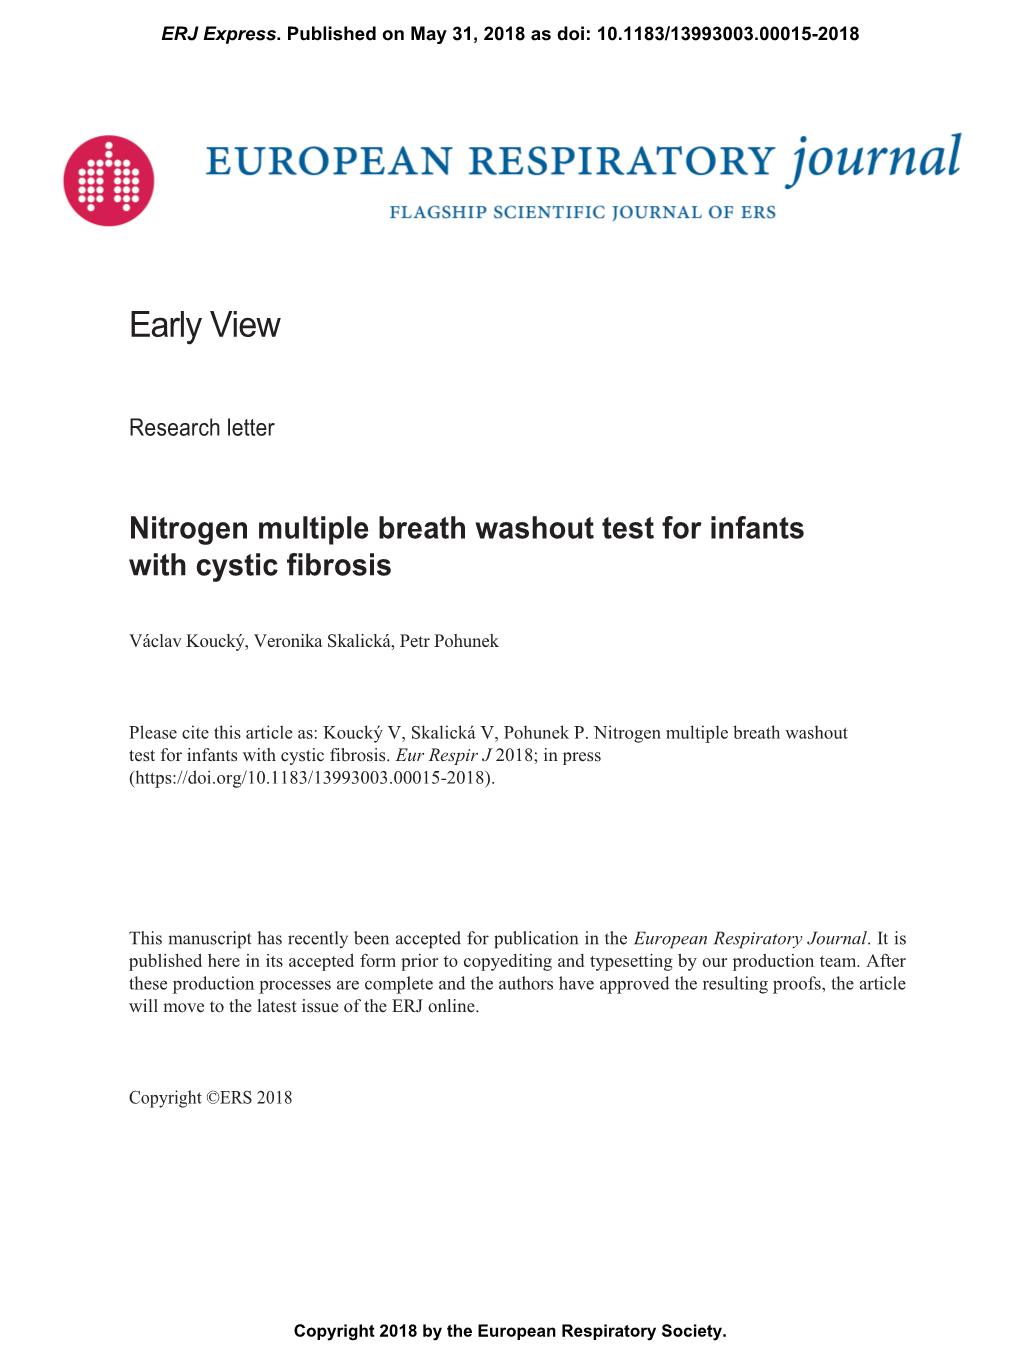 Nitrogen Multiple Breath Washout Test for Infants with Cystic Fibrosis